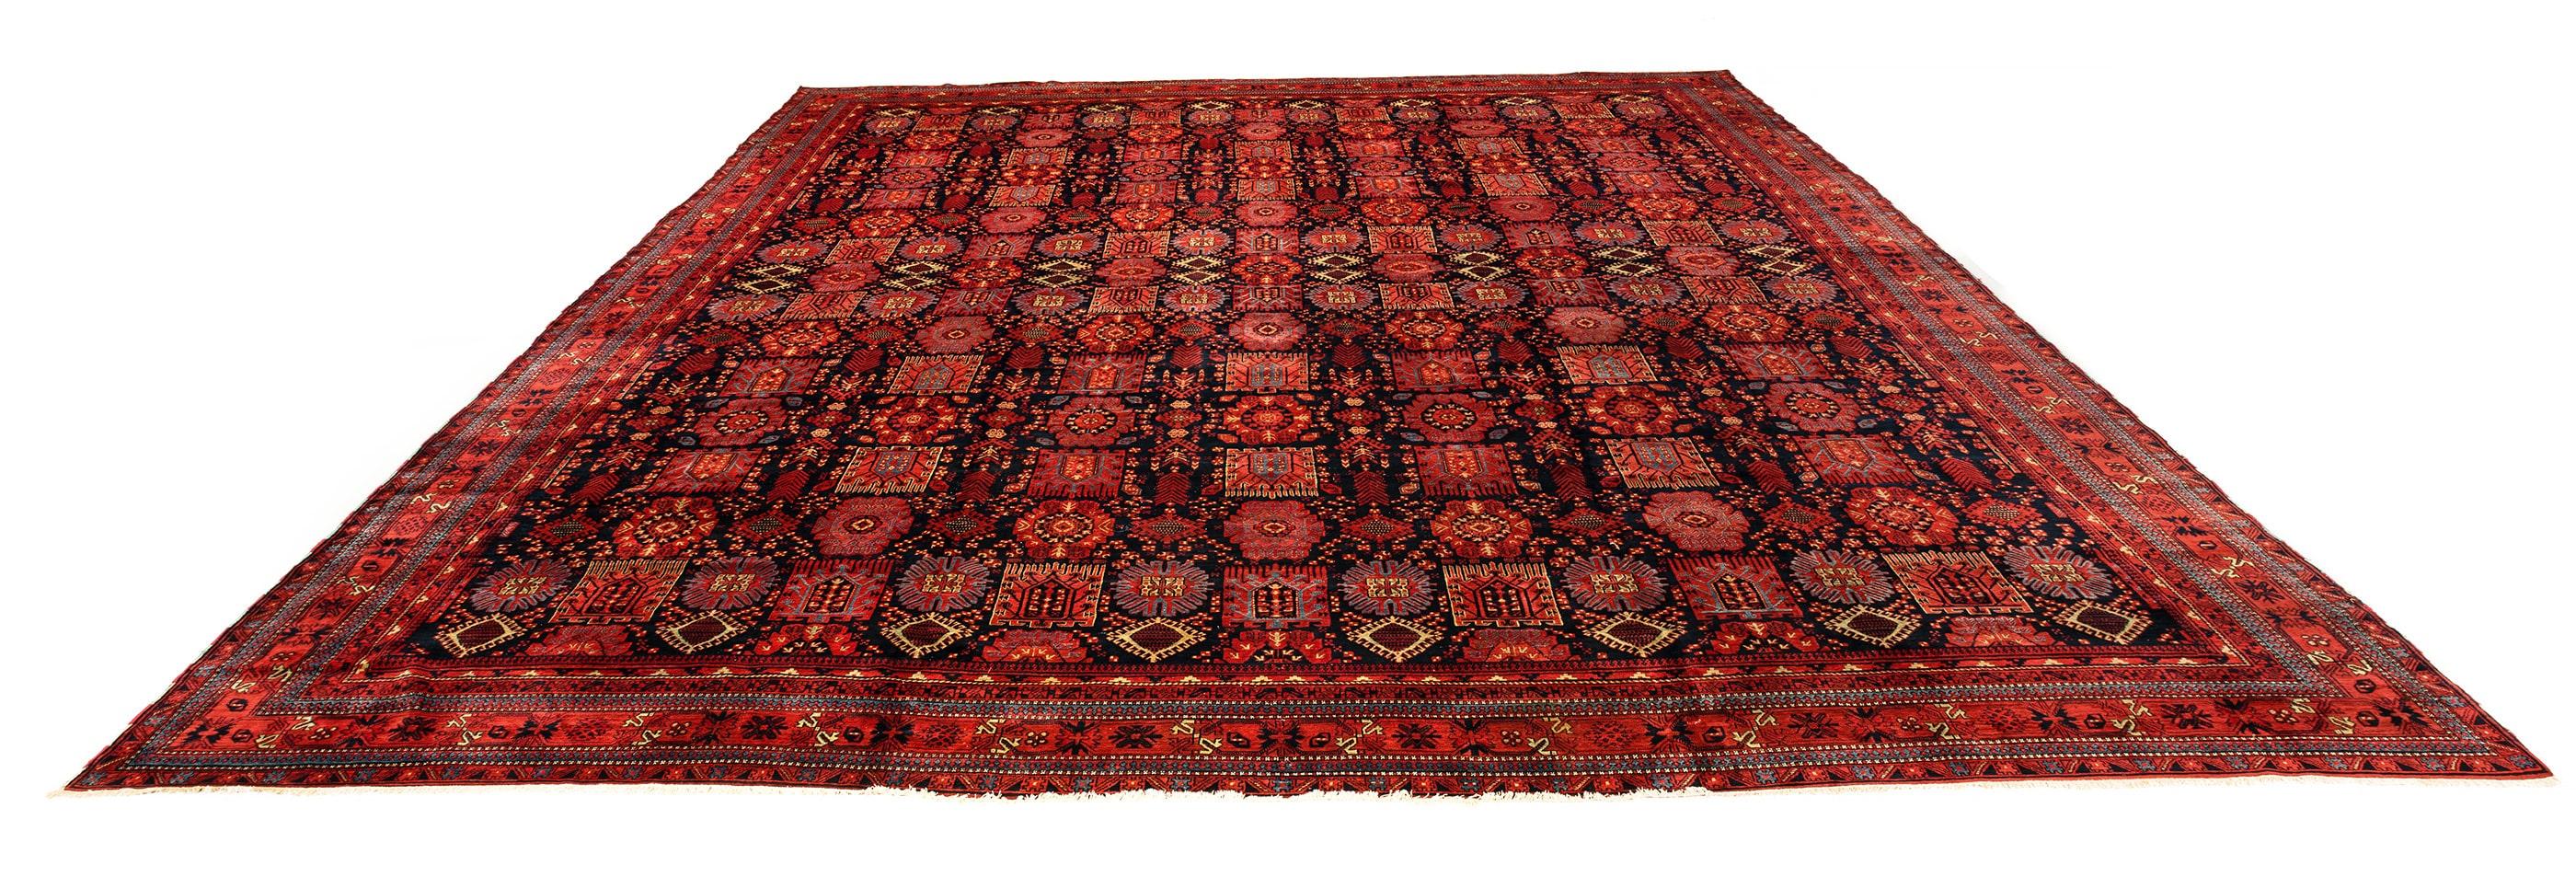 Hand-Knotted Antique Indian Agra Vegetable and Cochineal Dyed Wool Rug with Mosaic Design For Sale